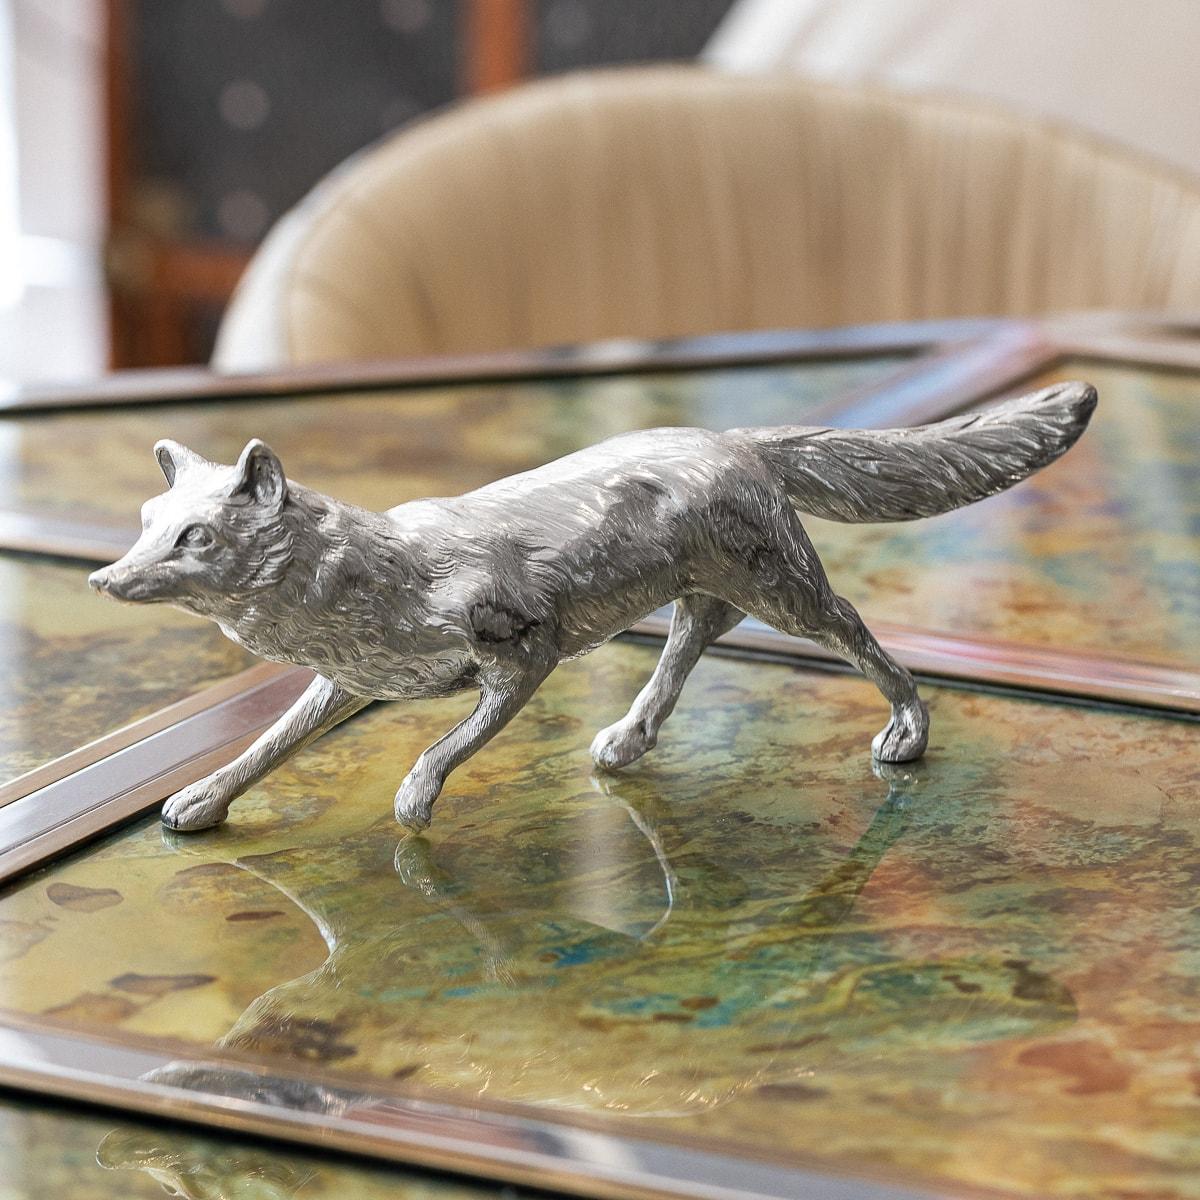 Antique early-20th Century German solid silver table ornament, realistically cast as a prowling fox, with ears pricked and eyes wide open. Hallmarked English import silver (925 standard), London, year 1911 (q), Importer ABD (Adolph Barsach